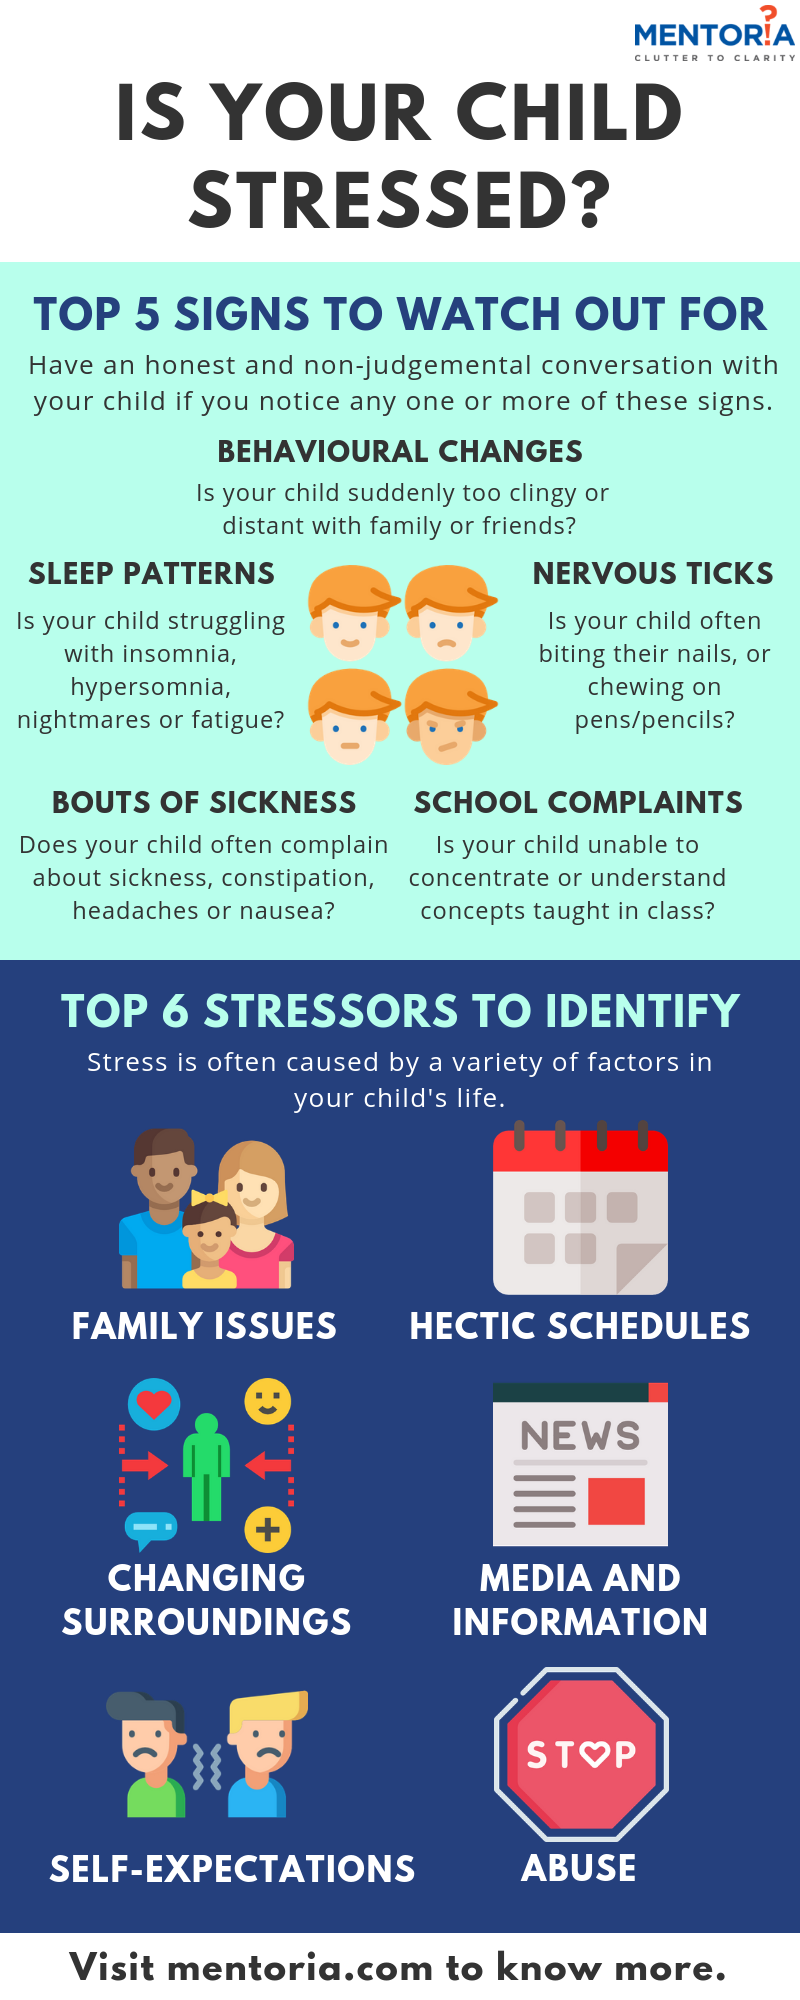 Signs of stress